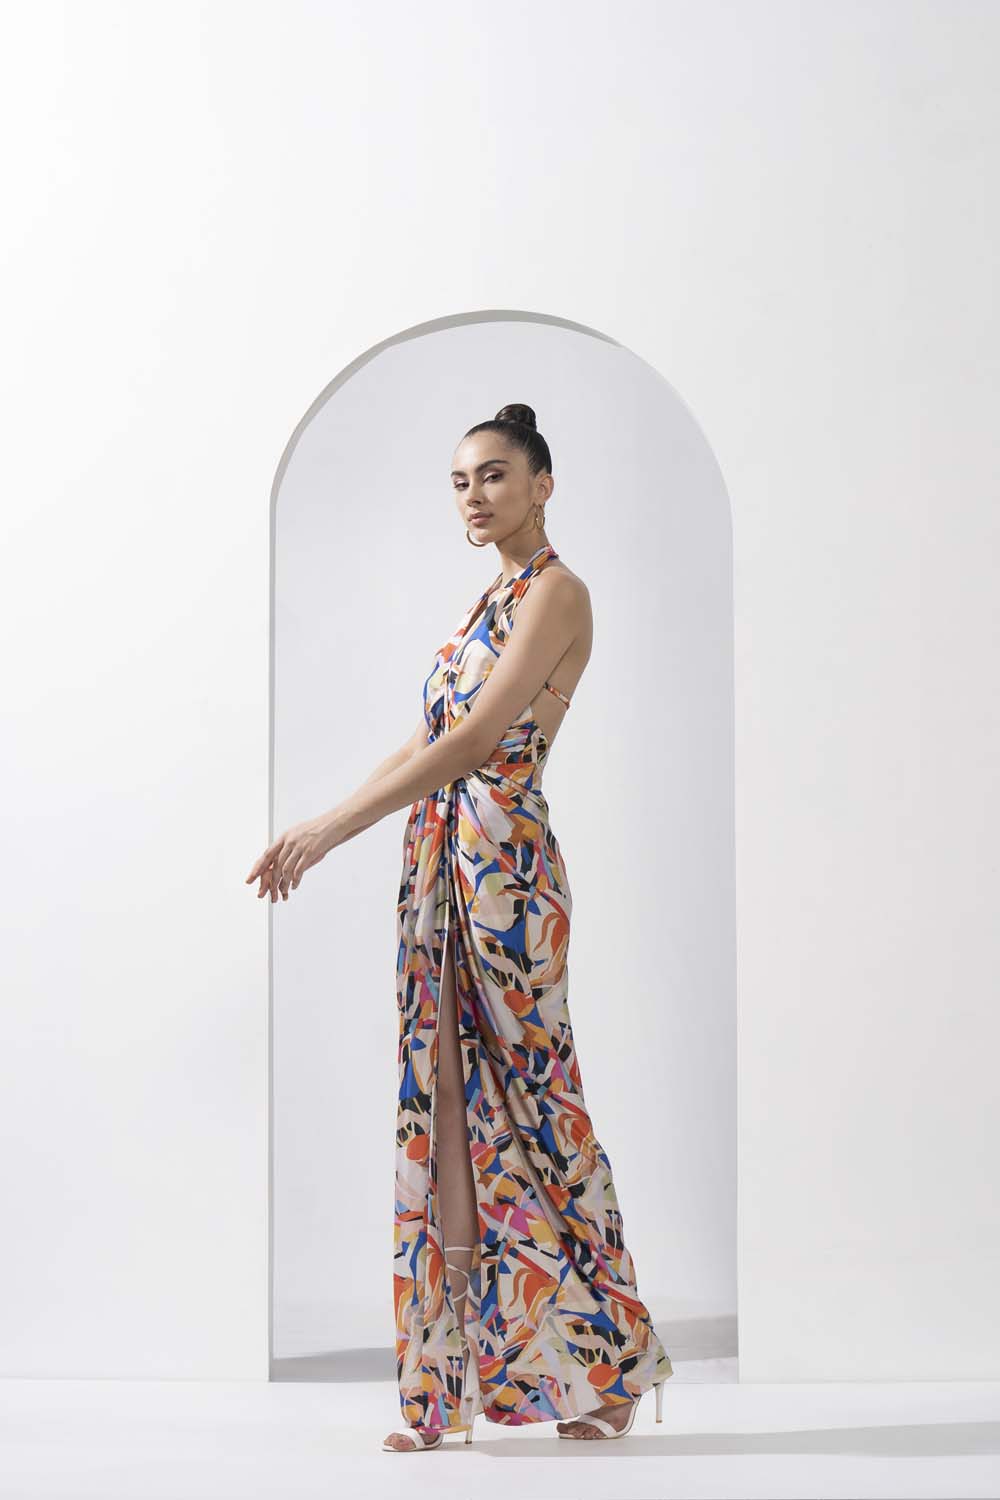 Abstract geo printed draped halter neck dress made with lustrous satin.